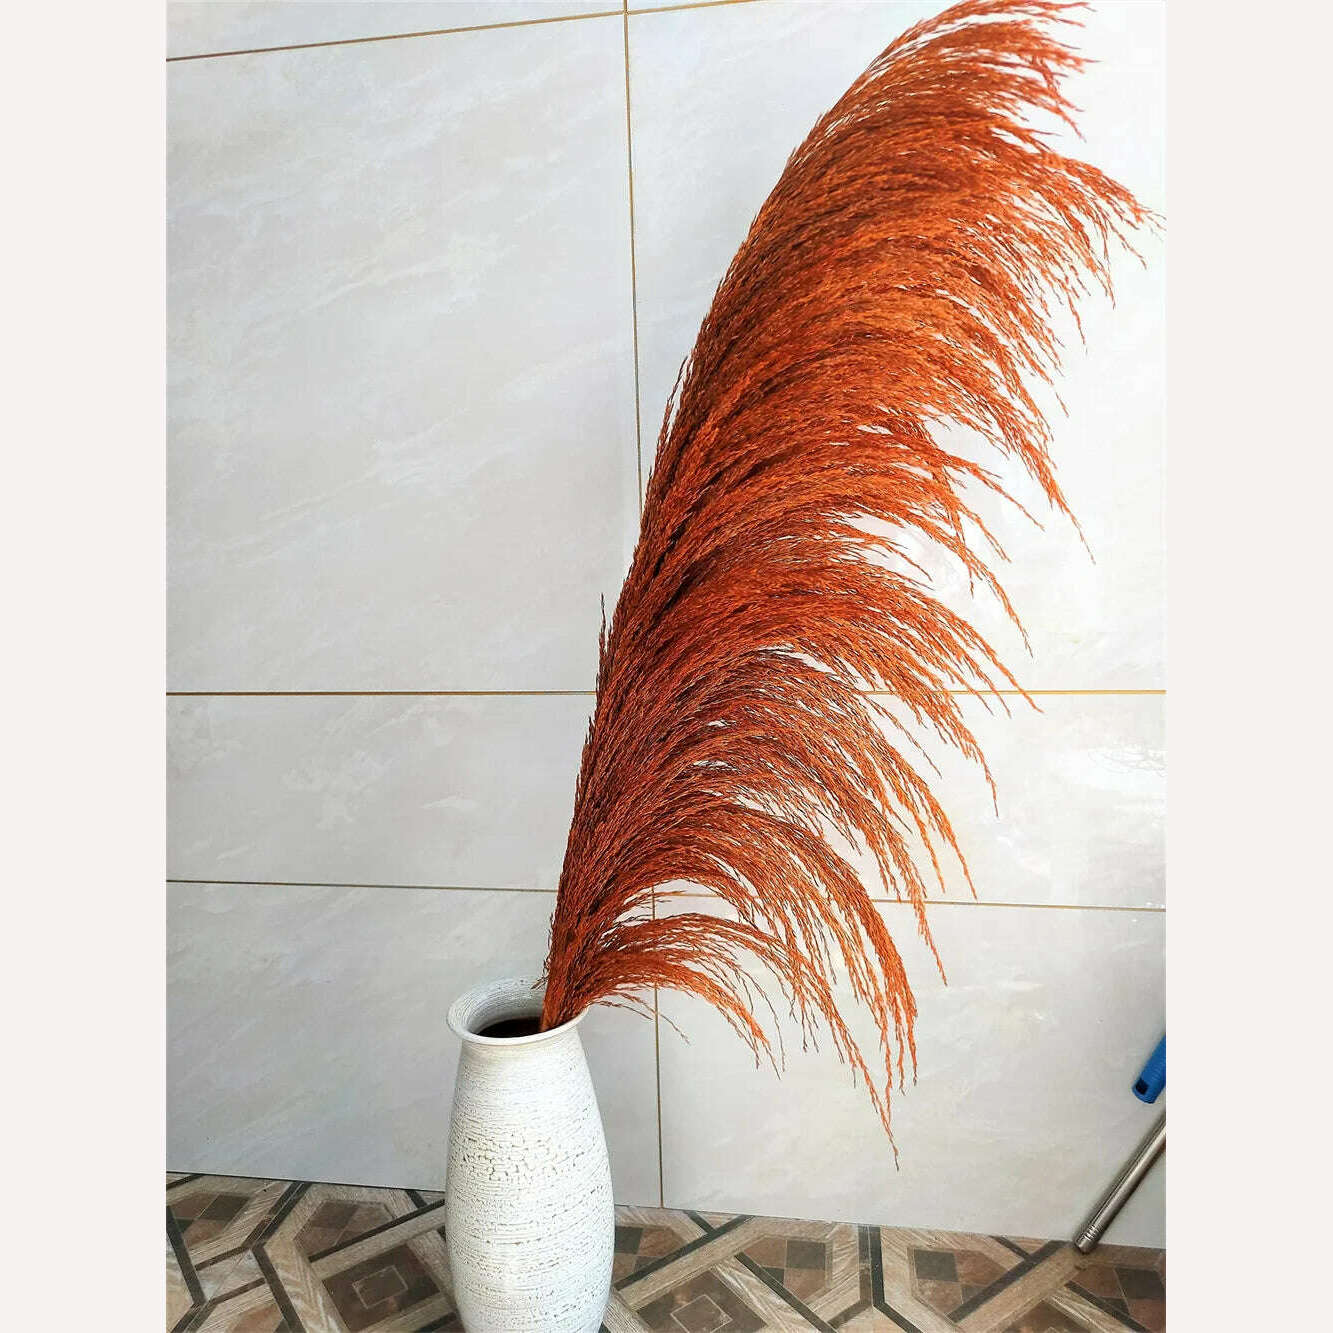 KIMLUD, Pampas Grass Tall,80-120cm Natural Brown Pampas Floral Vintage Dried Flower,Large Dried Plant for Living Room Boho Decor Bouquet, KIMLUD Womens Clothes